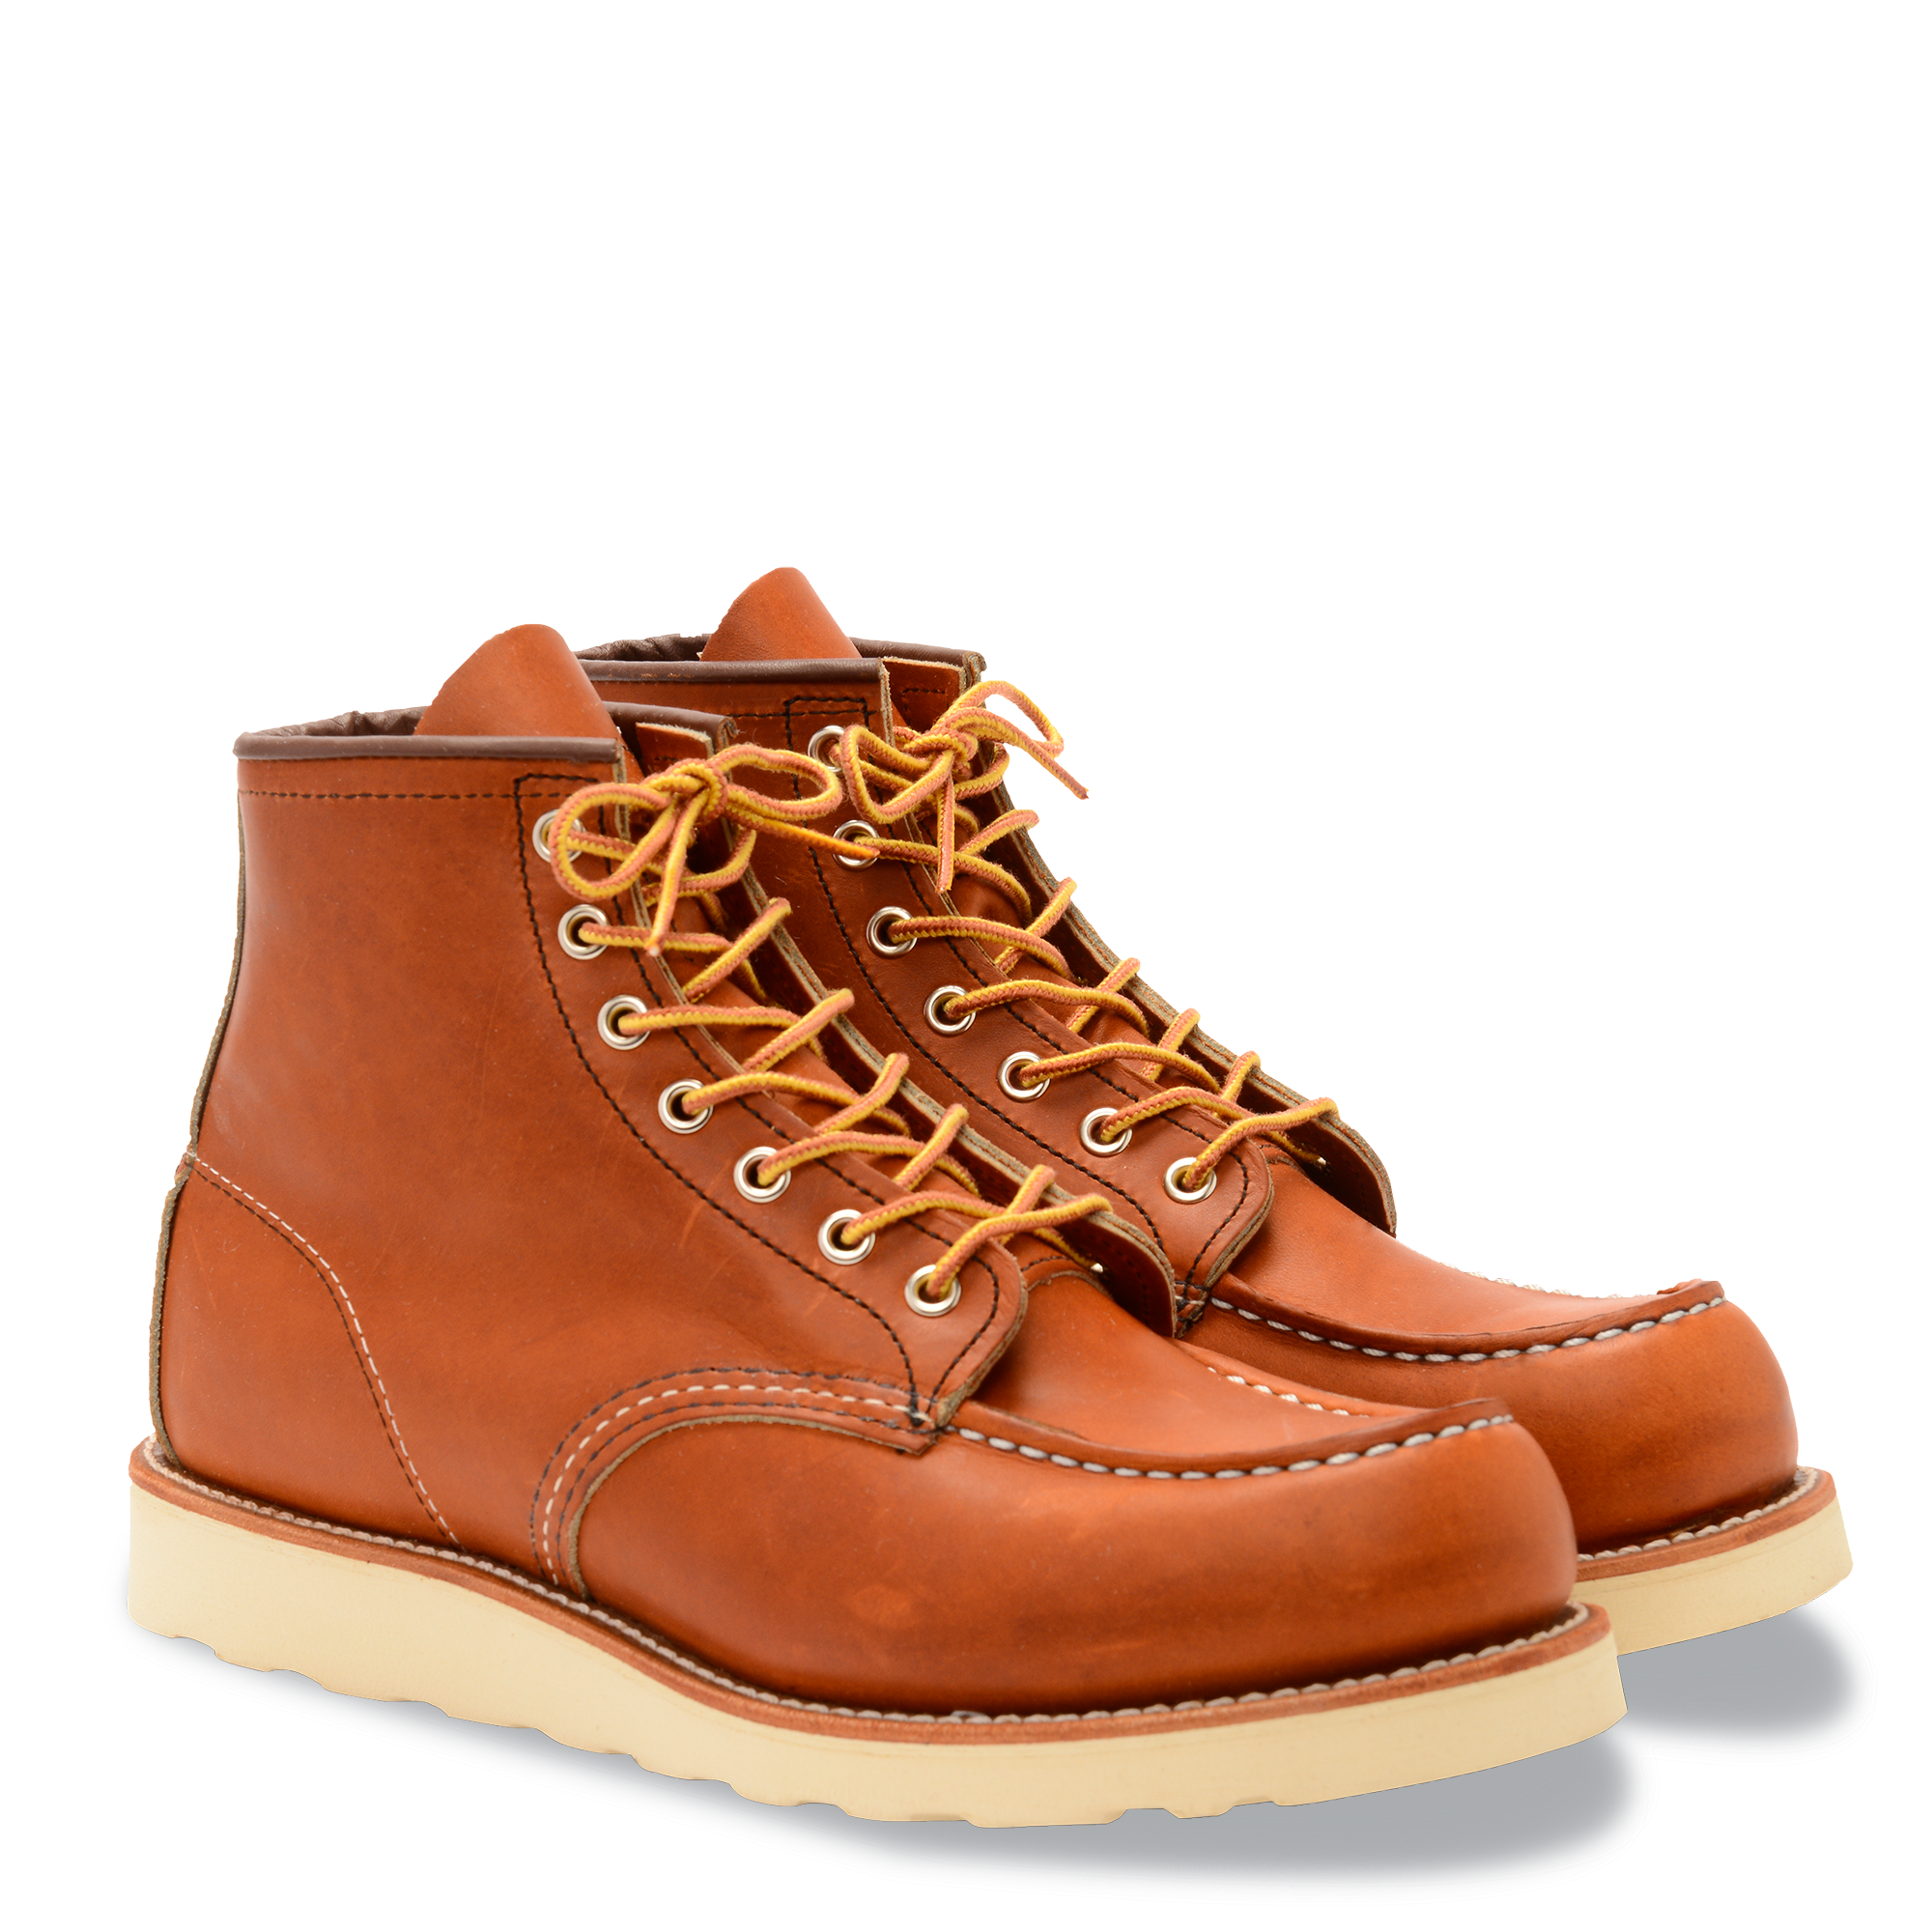 Red Wing Classic Moc Toe Boots 875 Red Wing London London